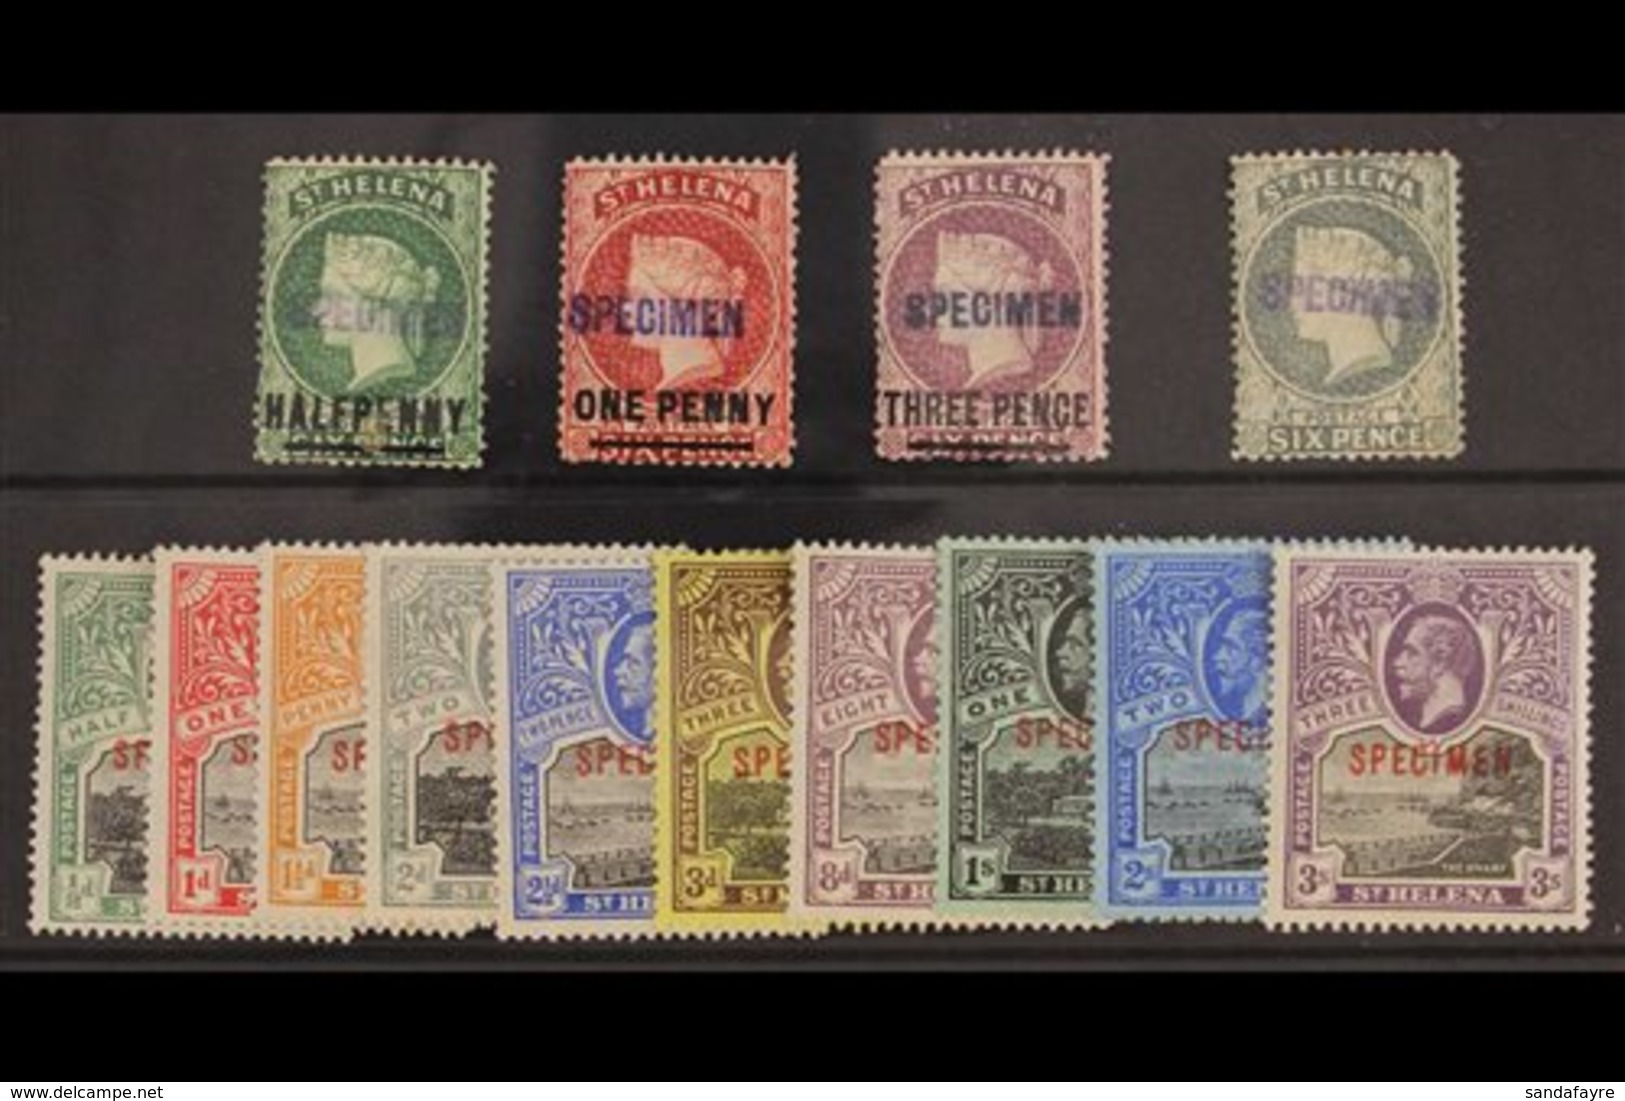 SPECIMENS Fresh Mint Selection With Scarce 1884 Set Of 4, SG 40s/44s And 1912 Geo V Set Complete, SG 72s/81s. (14 Stamps - Saint Helena Island